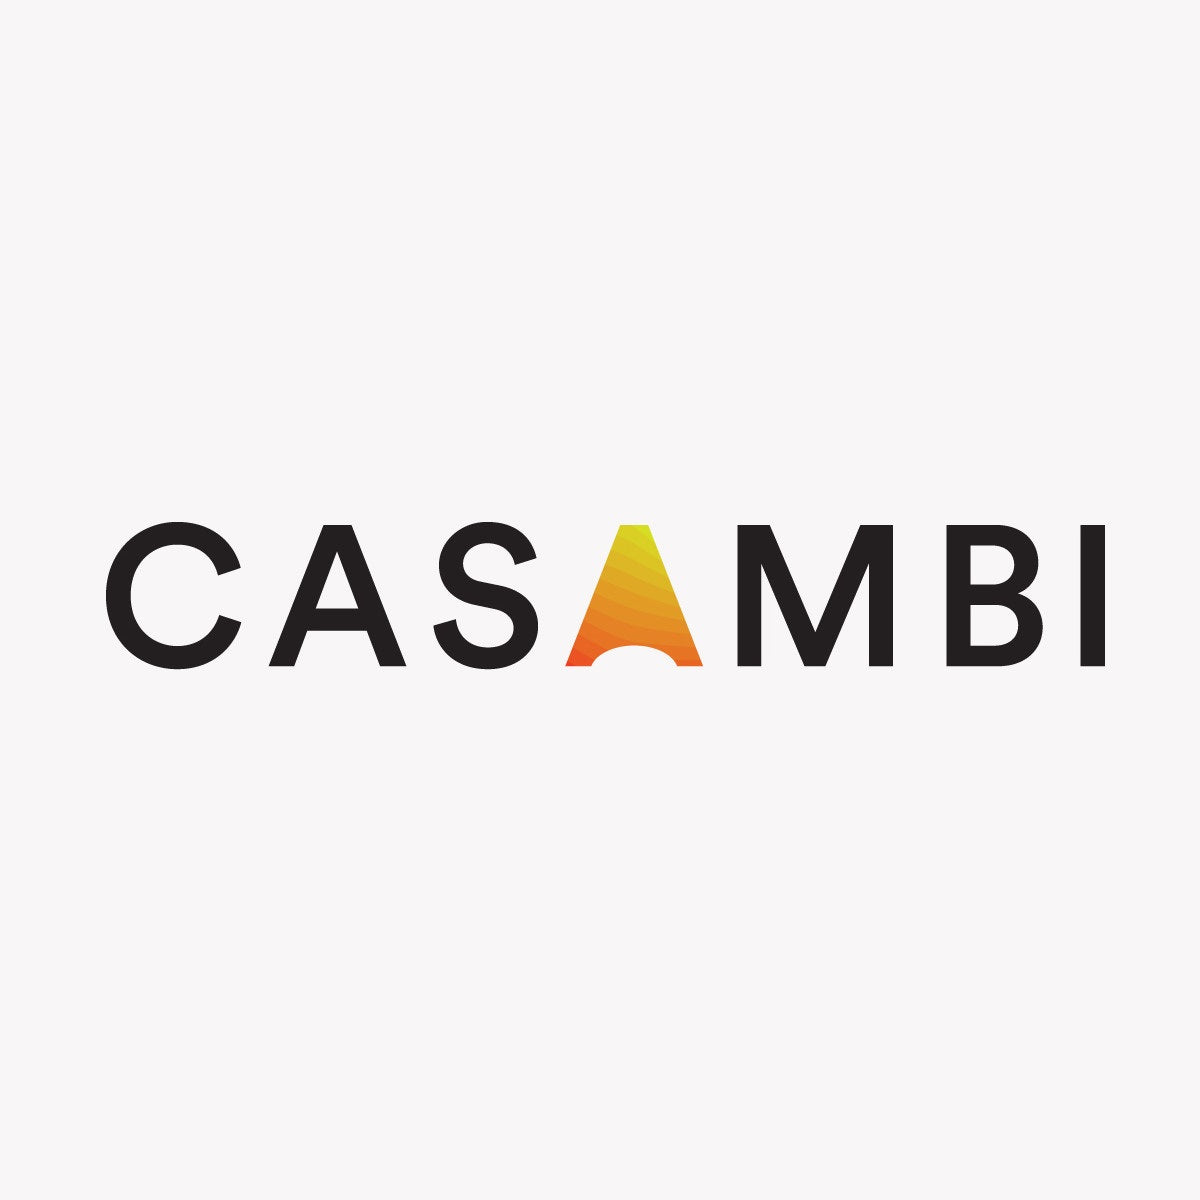 Buy Casambi wireless lighting dimmers, controllers and switches in the USA